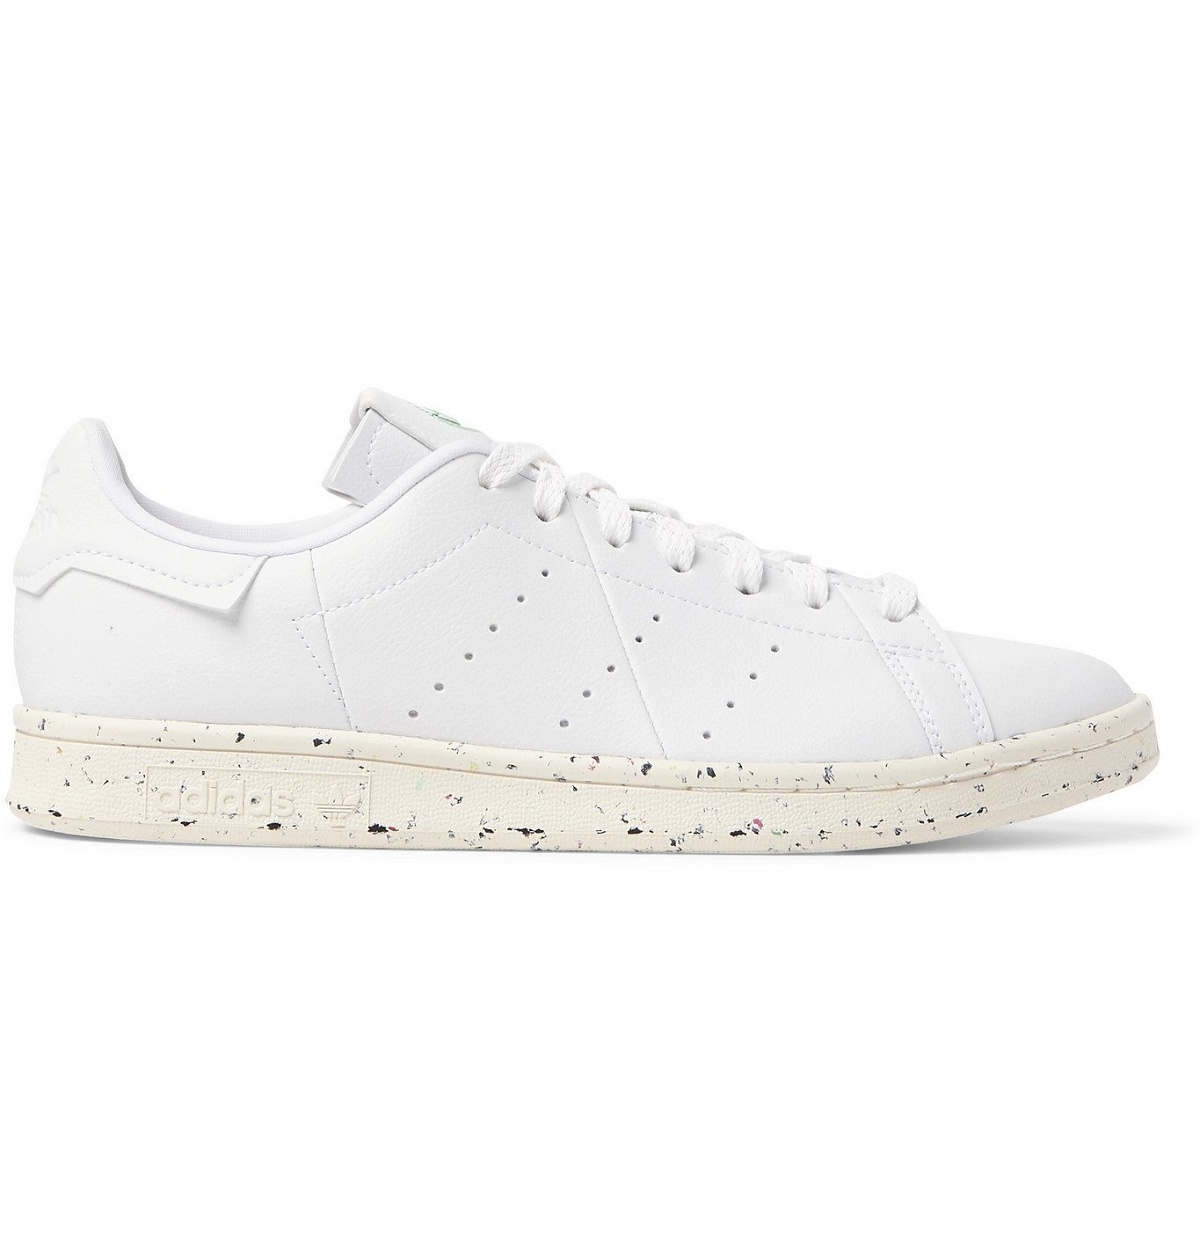 ADIDAS ORIGINALS Stan Smith Bold White // Flat leather sneakers